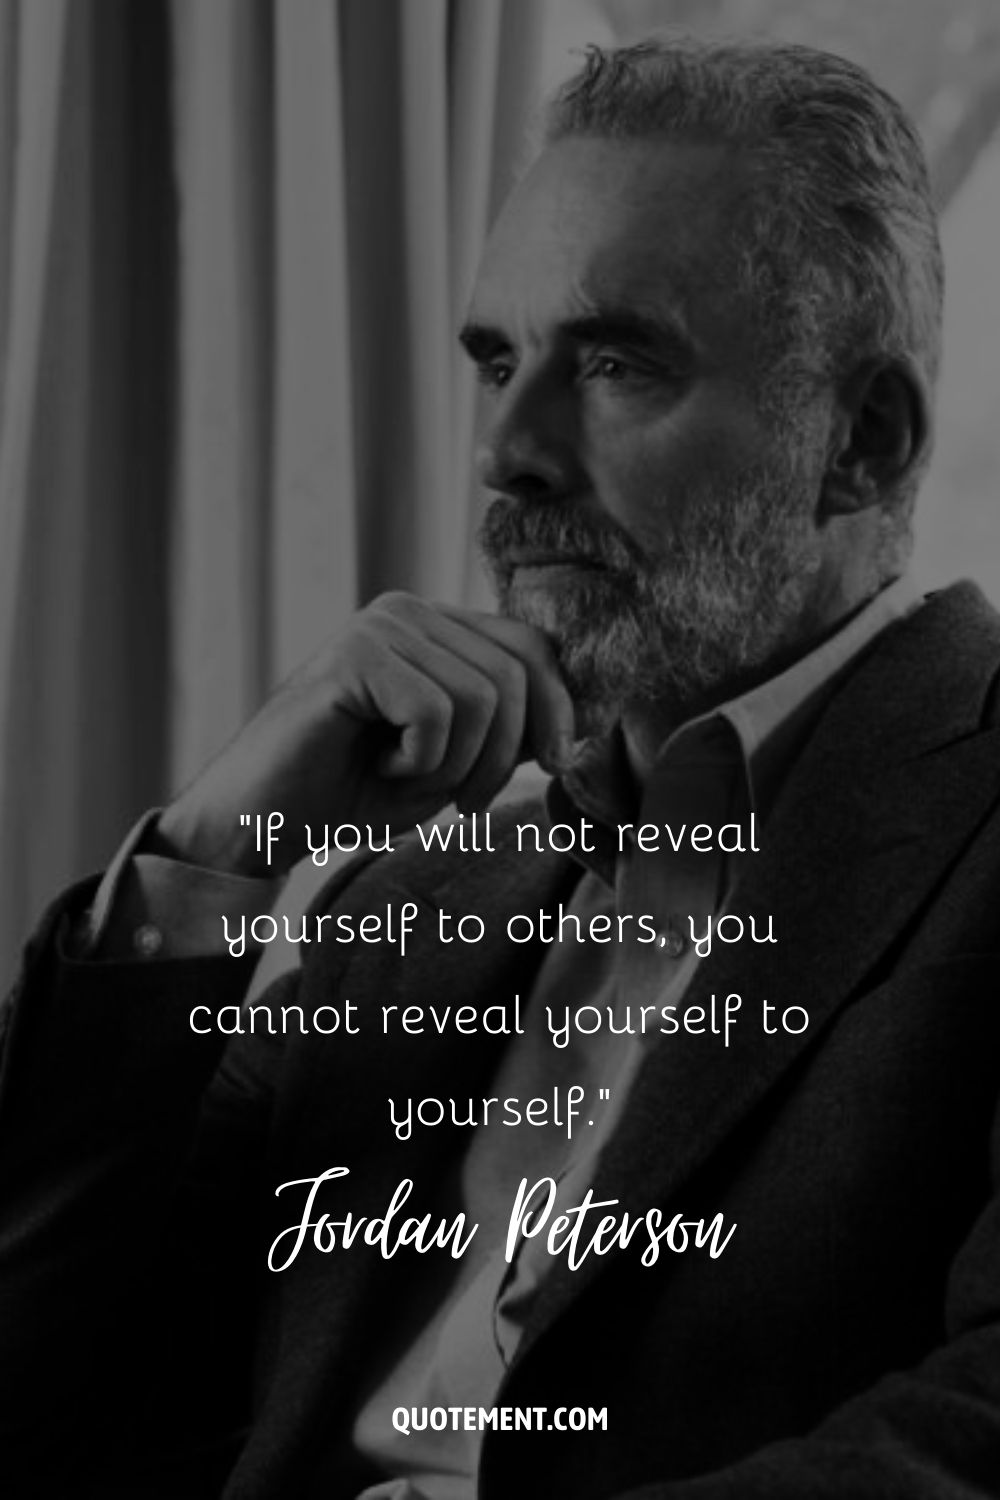 If you will not reveal yourself to others, you cannot reveal yourself to yourself